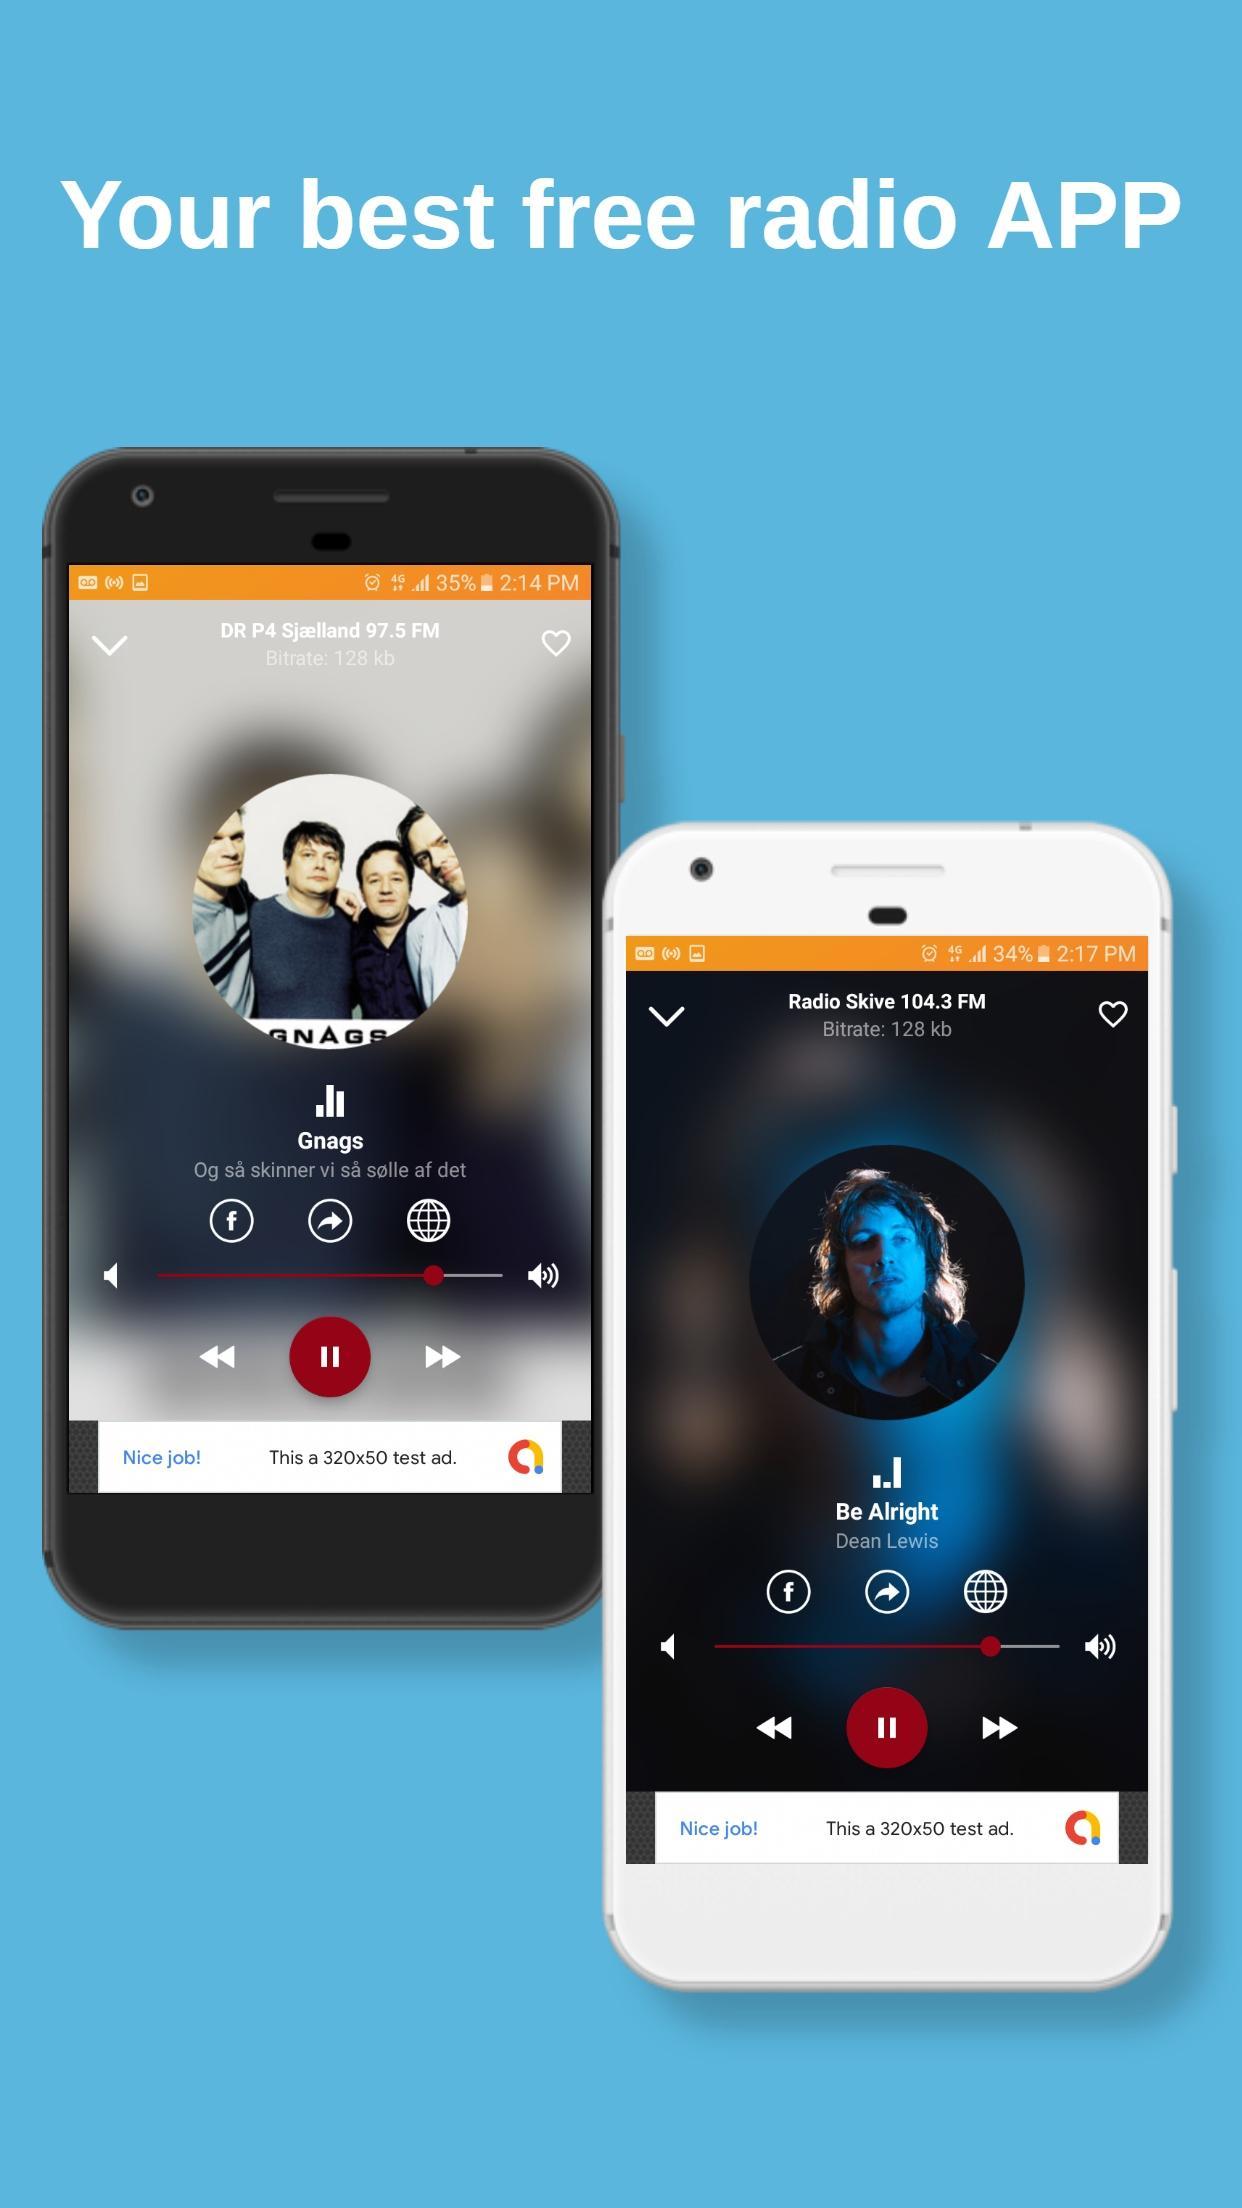 DR Radio P4 Danmark Online for Android - APK Download